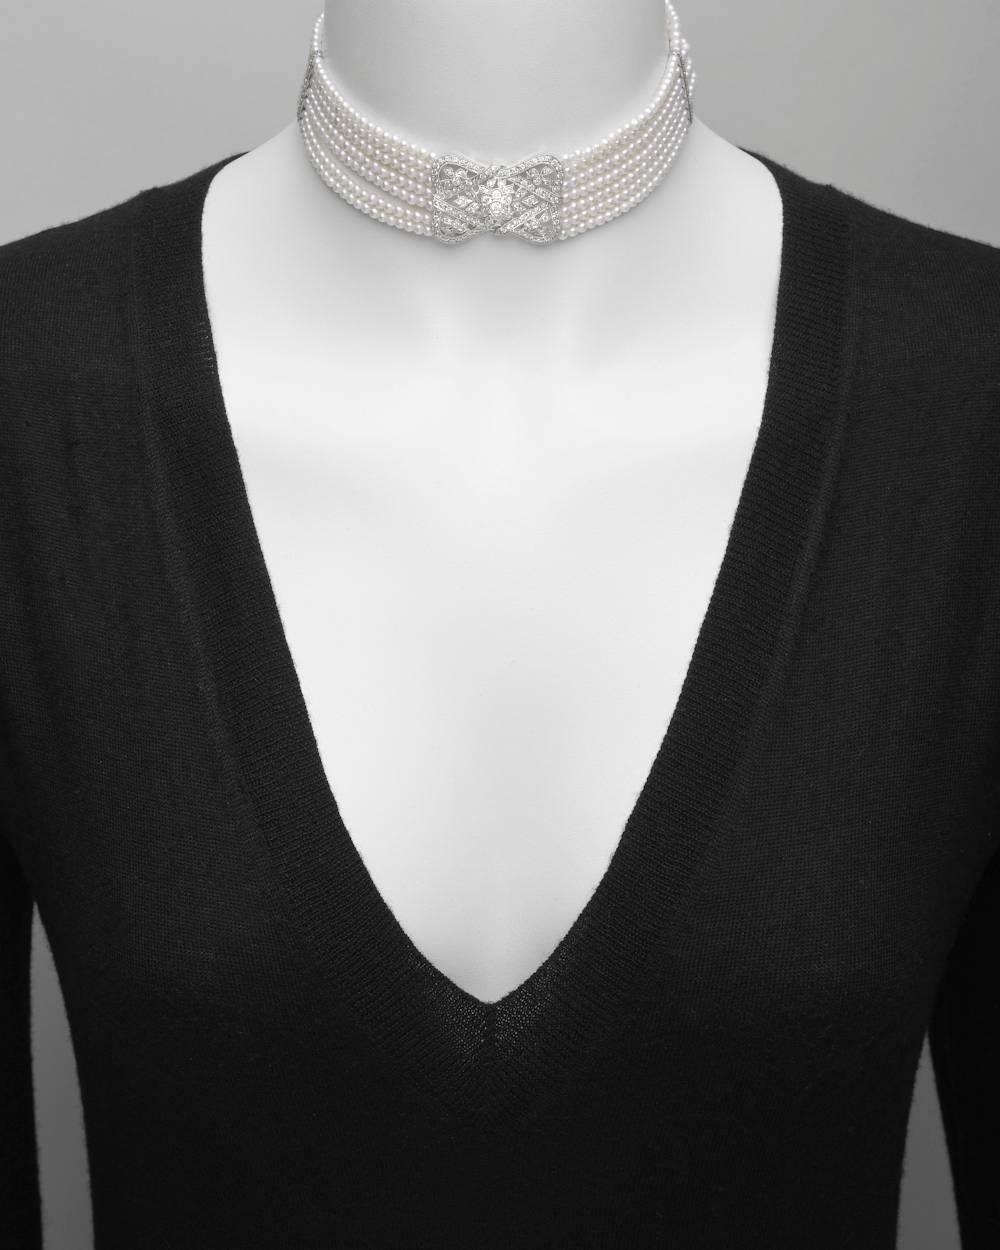 Edwardian-style 7-strand pearl choker necklace, centering a pierced diamond-set panel of ribbon and floral motifs, with two diamond spacer bars, the necklace secured by a dagger-style clasp with pavé-set diamond teardrop pendant, mounted in 18k